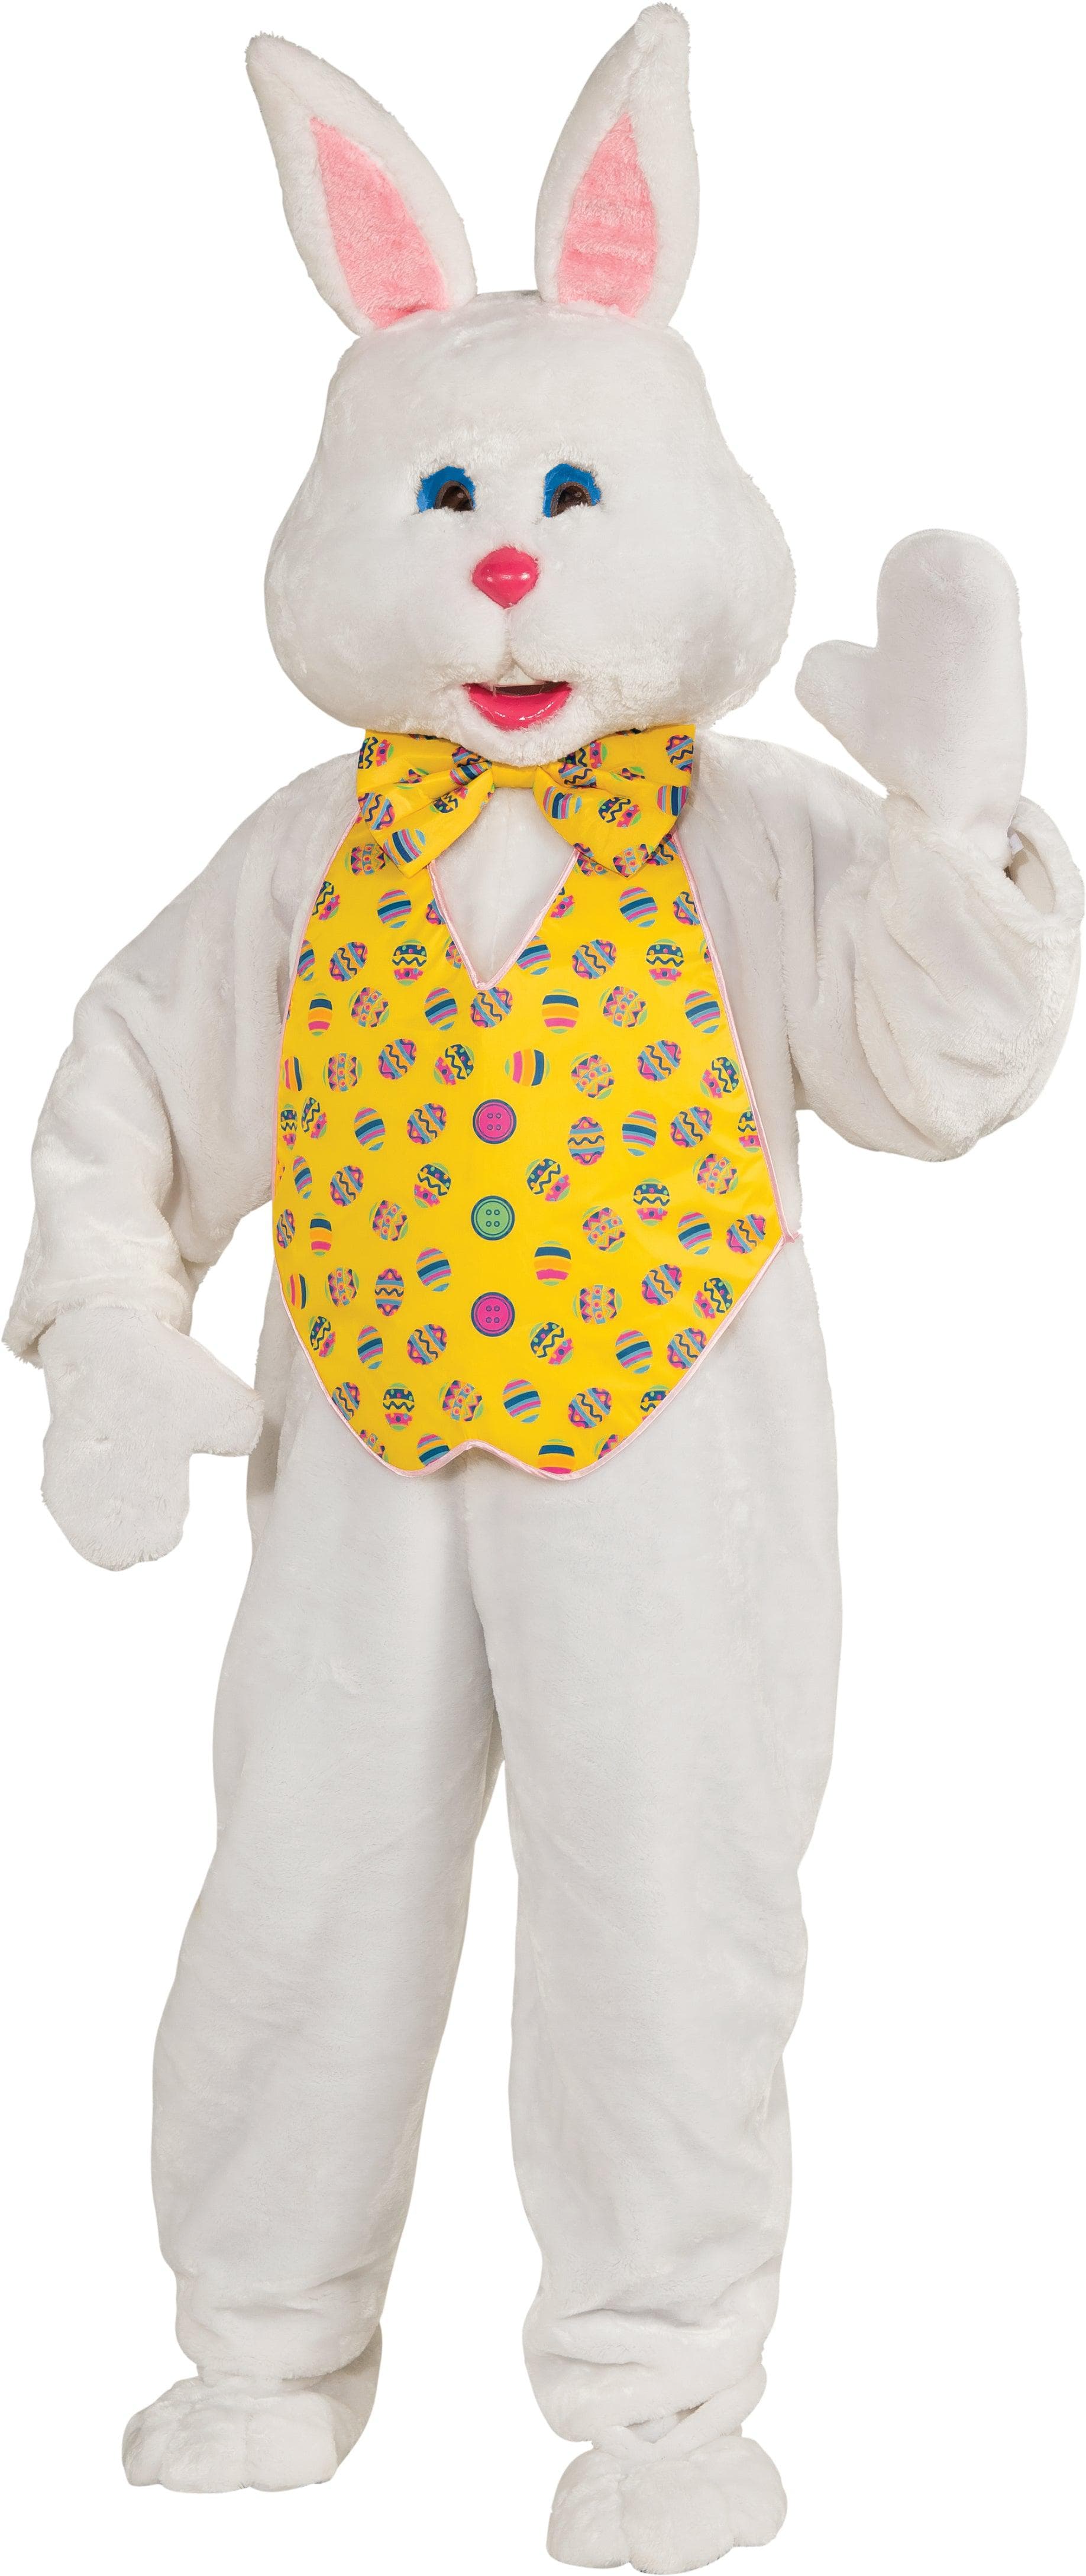 Adult White Easter Bunny Mascot With Yellow Vest Costume - costumes.com